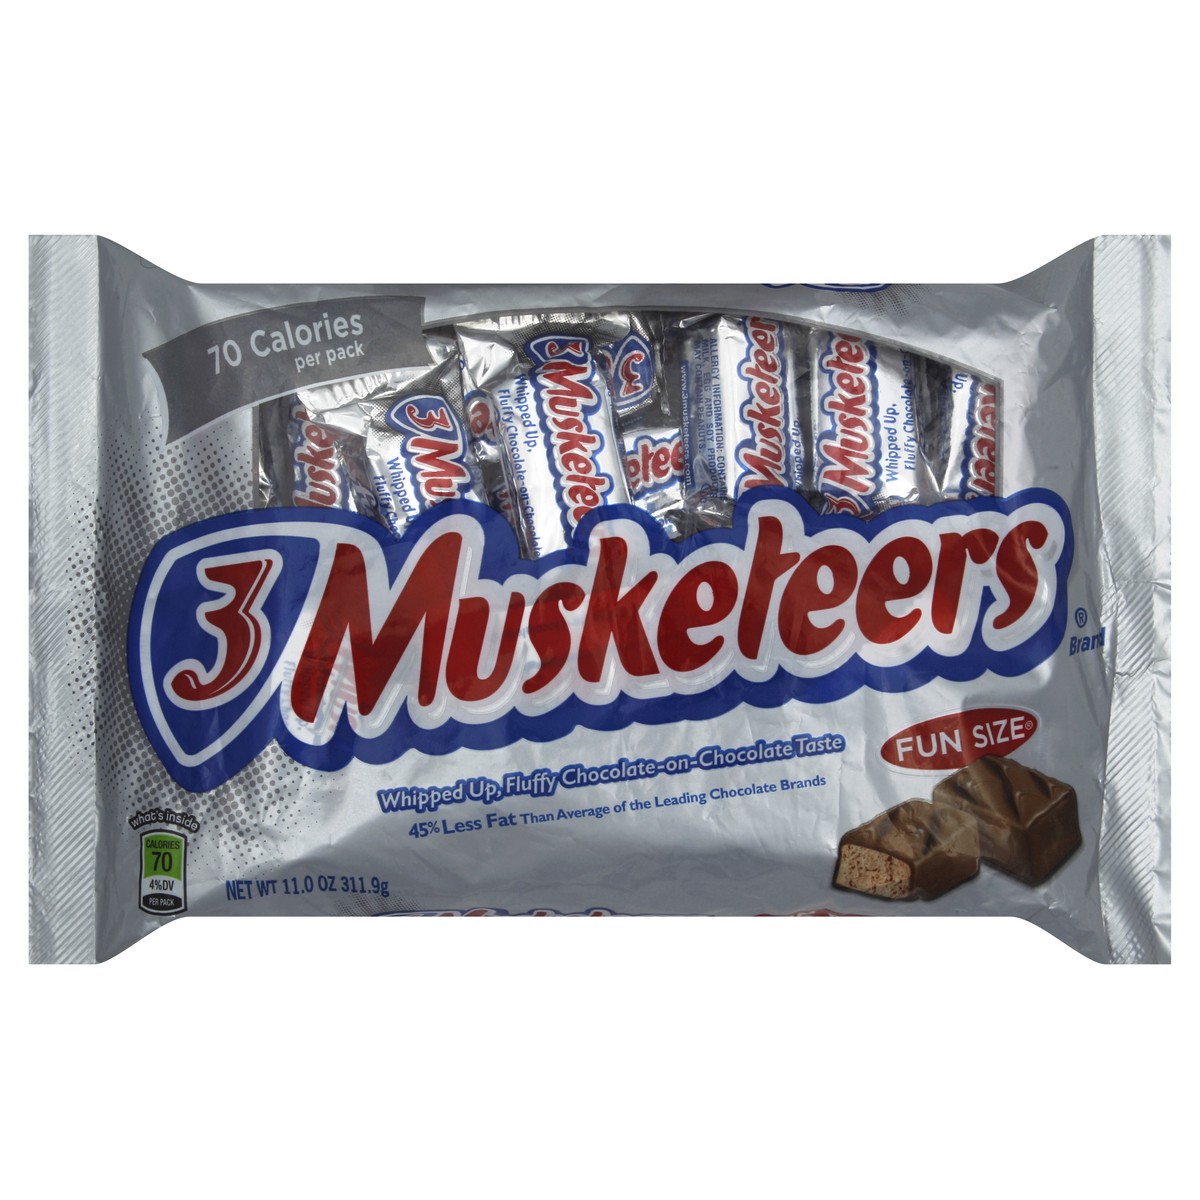 slide 5 of 5, 3 MUSKETEERS Candy Bar 11 oz, 11 oz